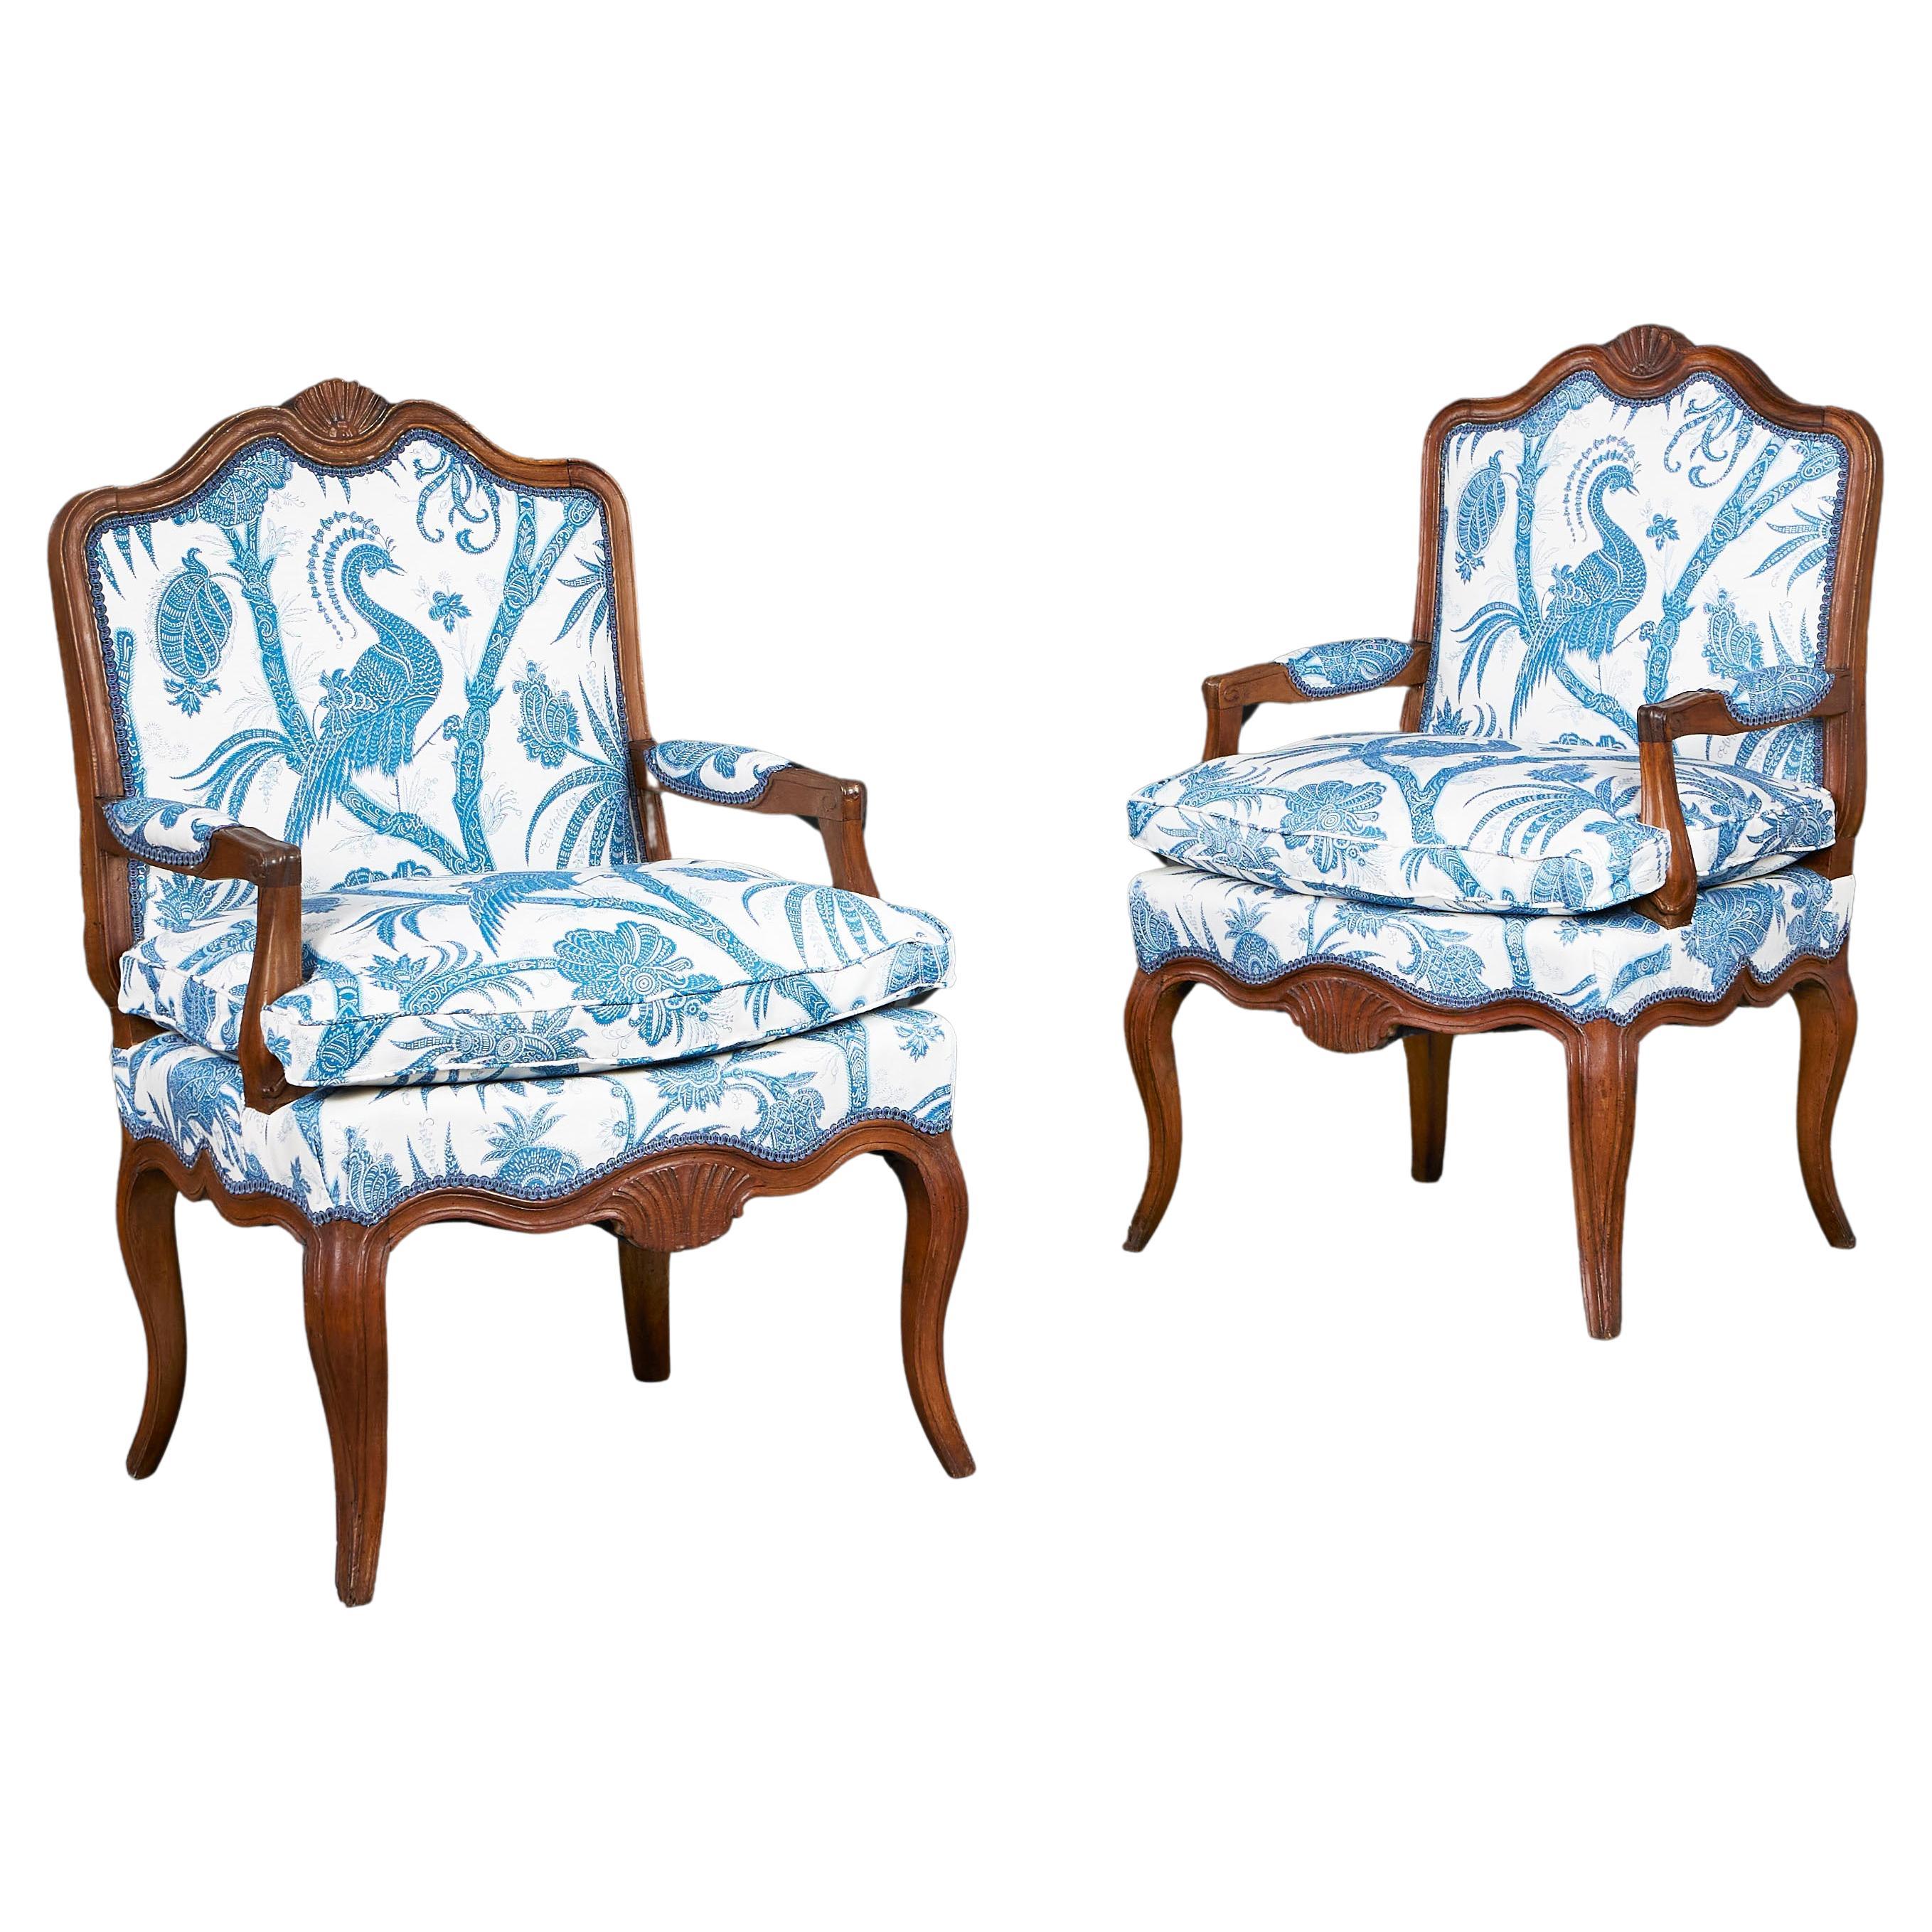 A pair of Early 19th Century French Walnut open Armchairs 